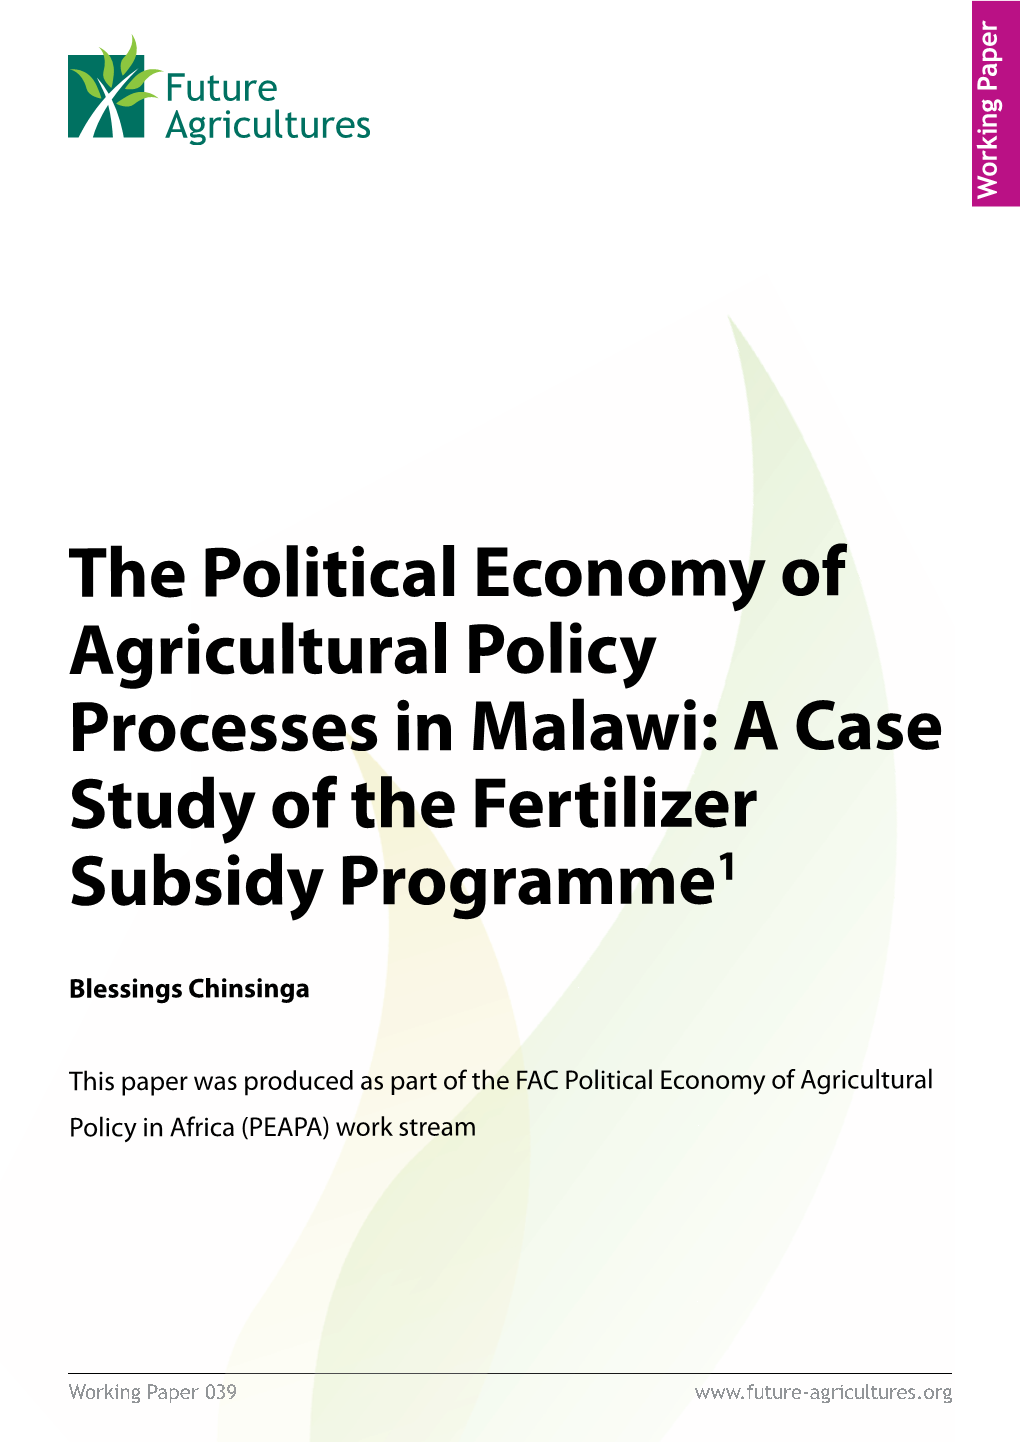 The Political Economy of Agricultural Policy Processes in Malawi: a Case Study of the Fertilizer Subsidy Programme1